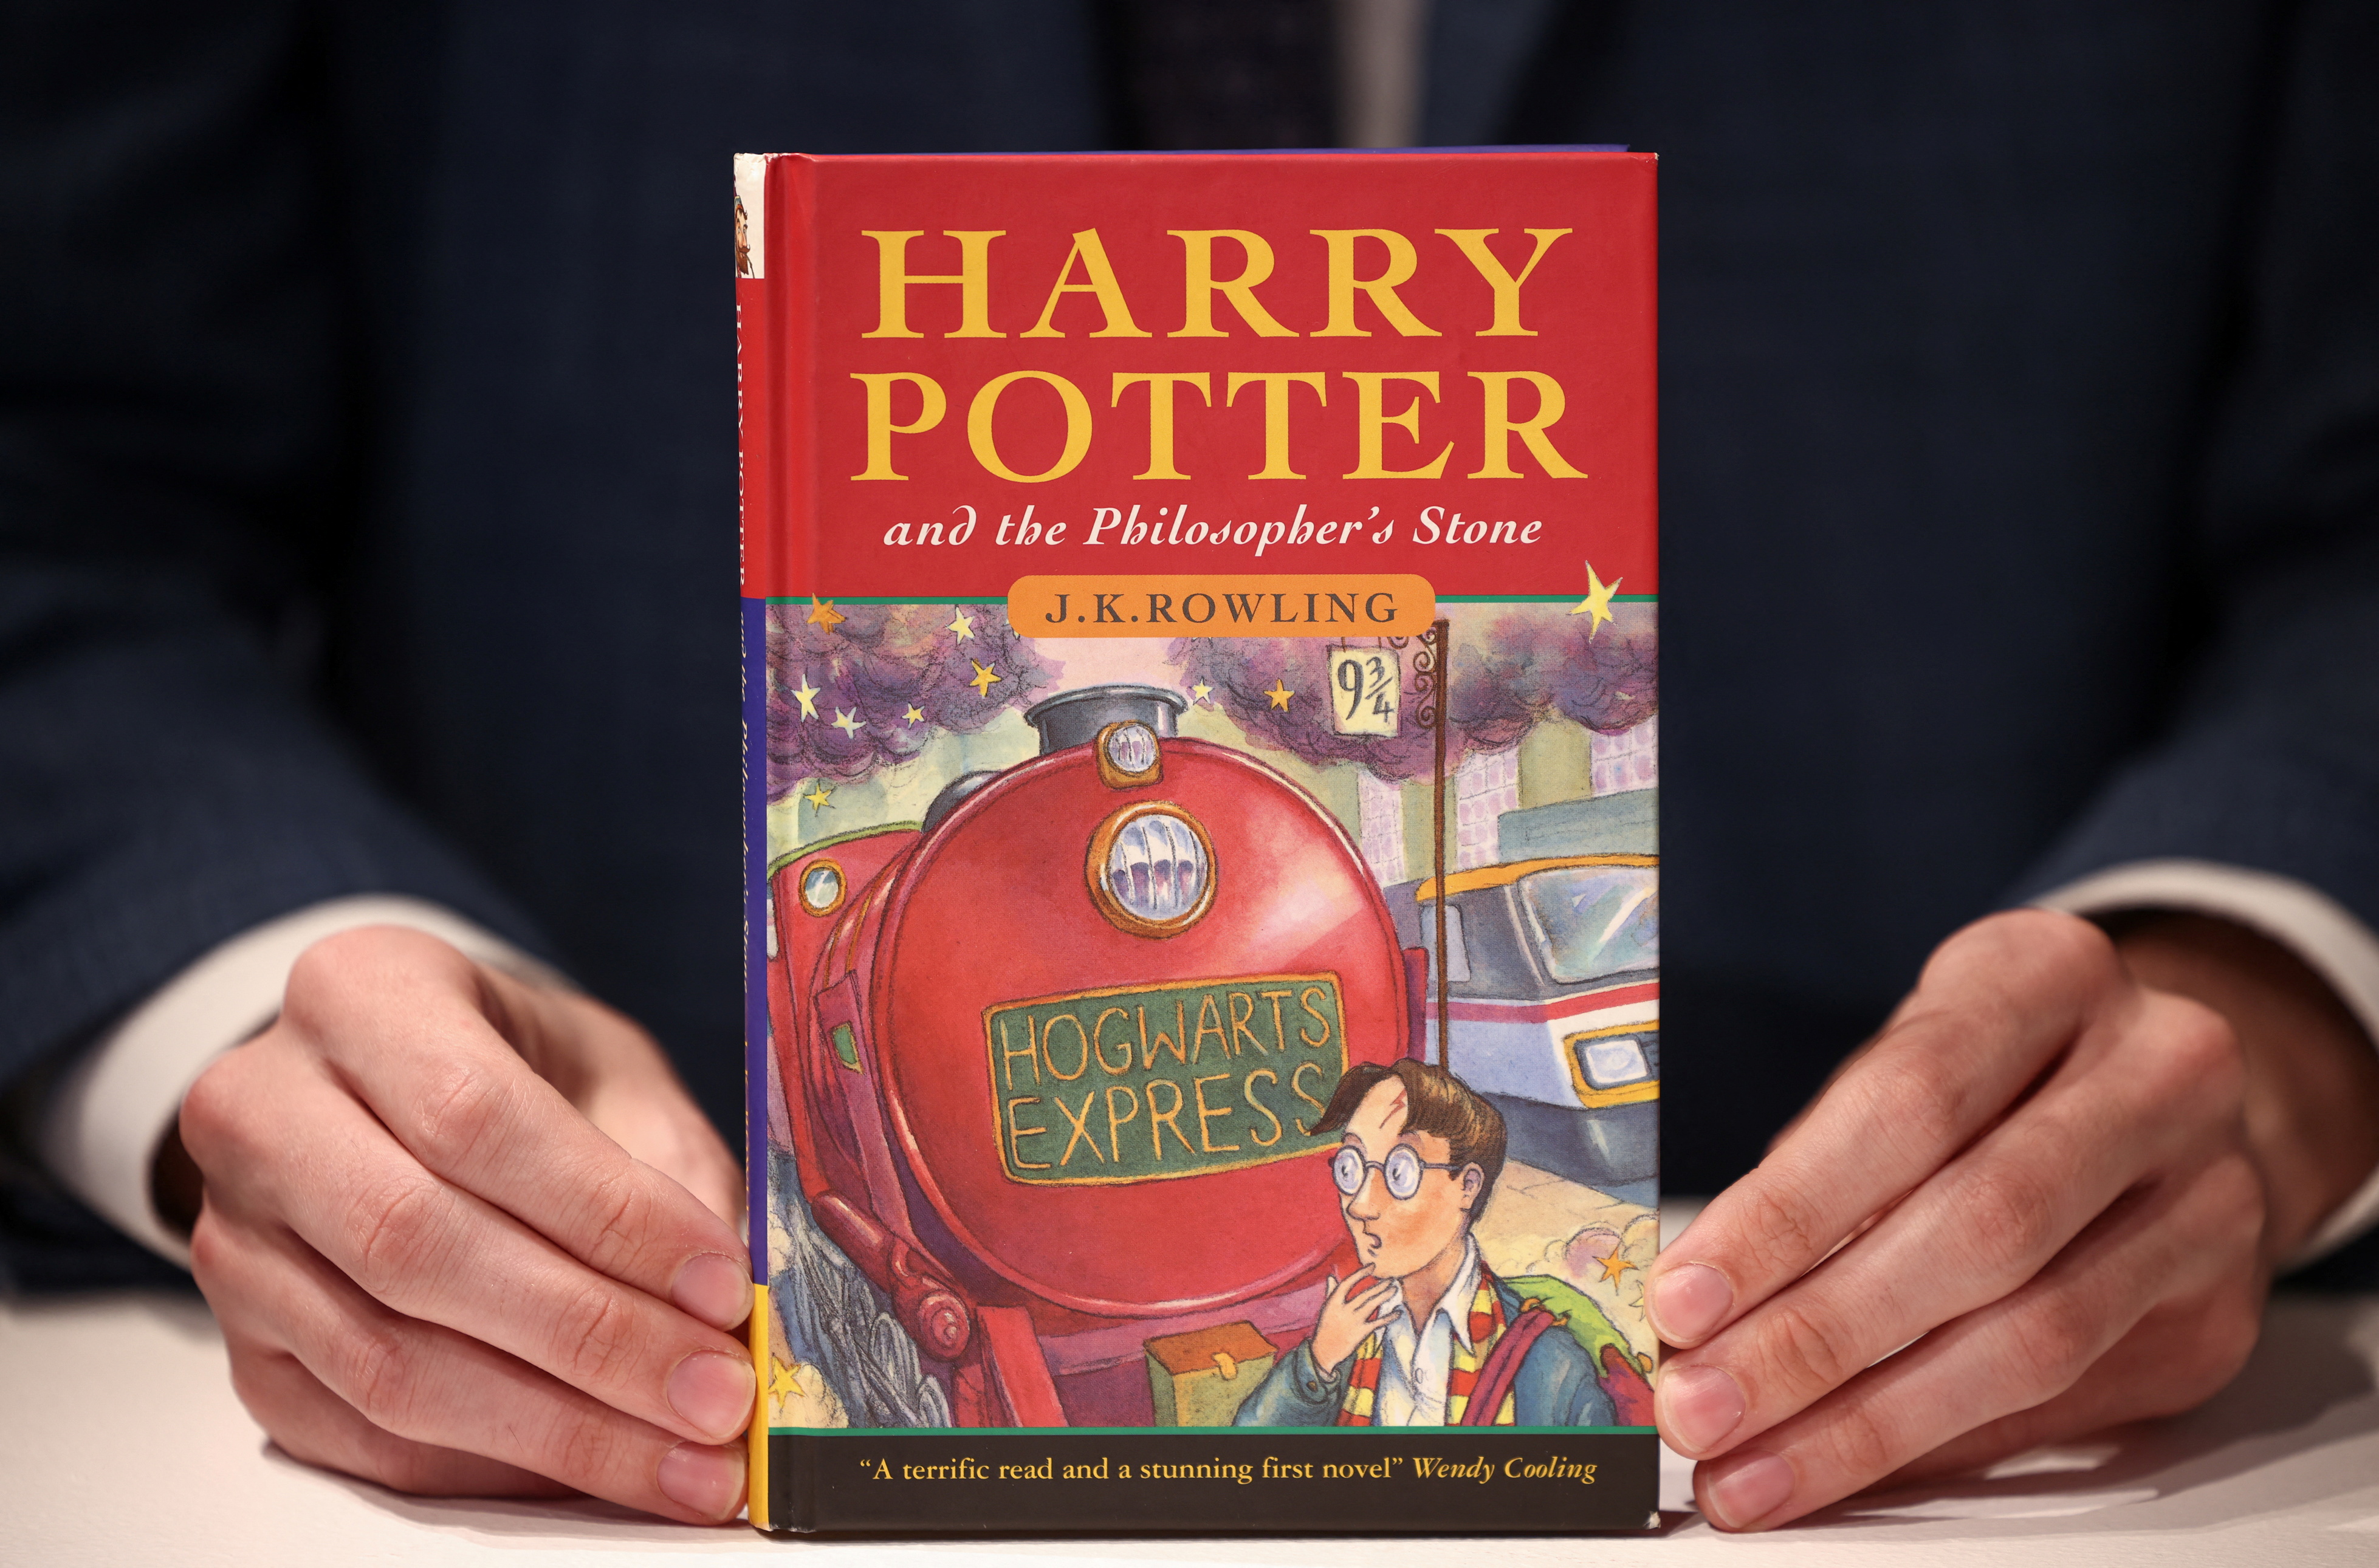 Rare first edition copy of 'Harry Potter and the Philosophers Stone' by British author J.K. Rowling at Christie's auction house in London